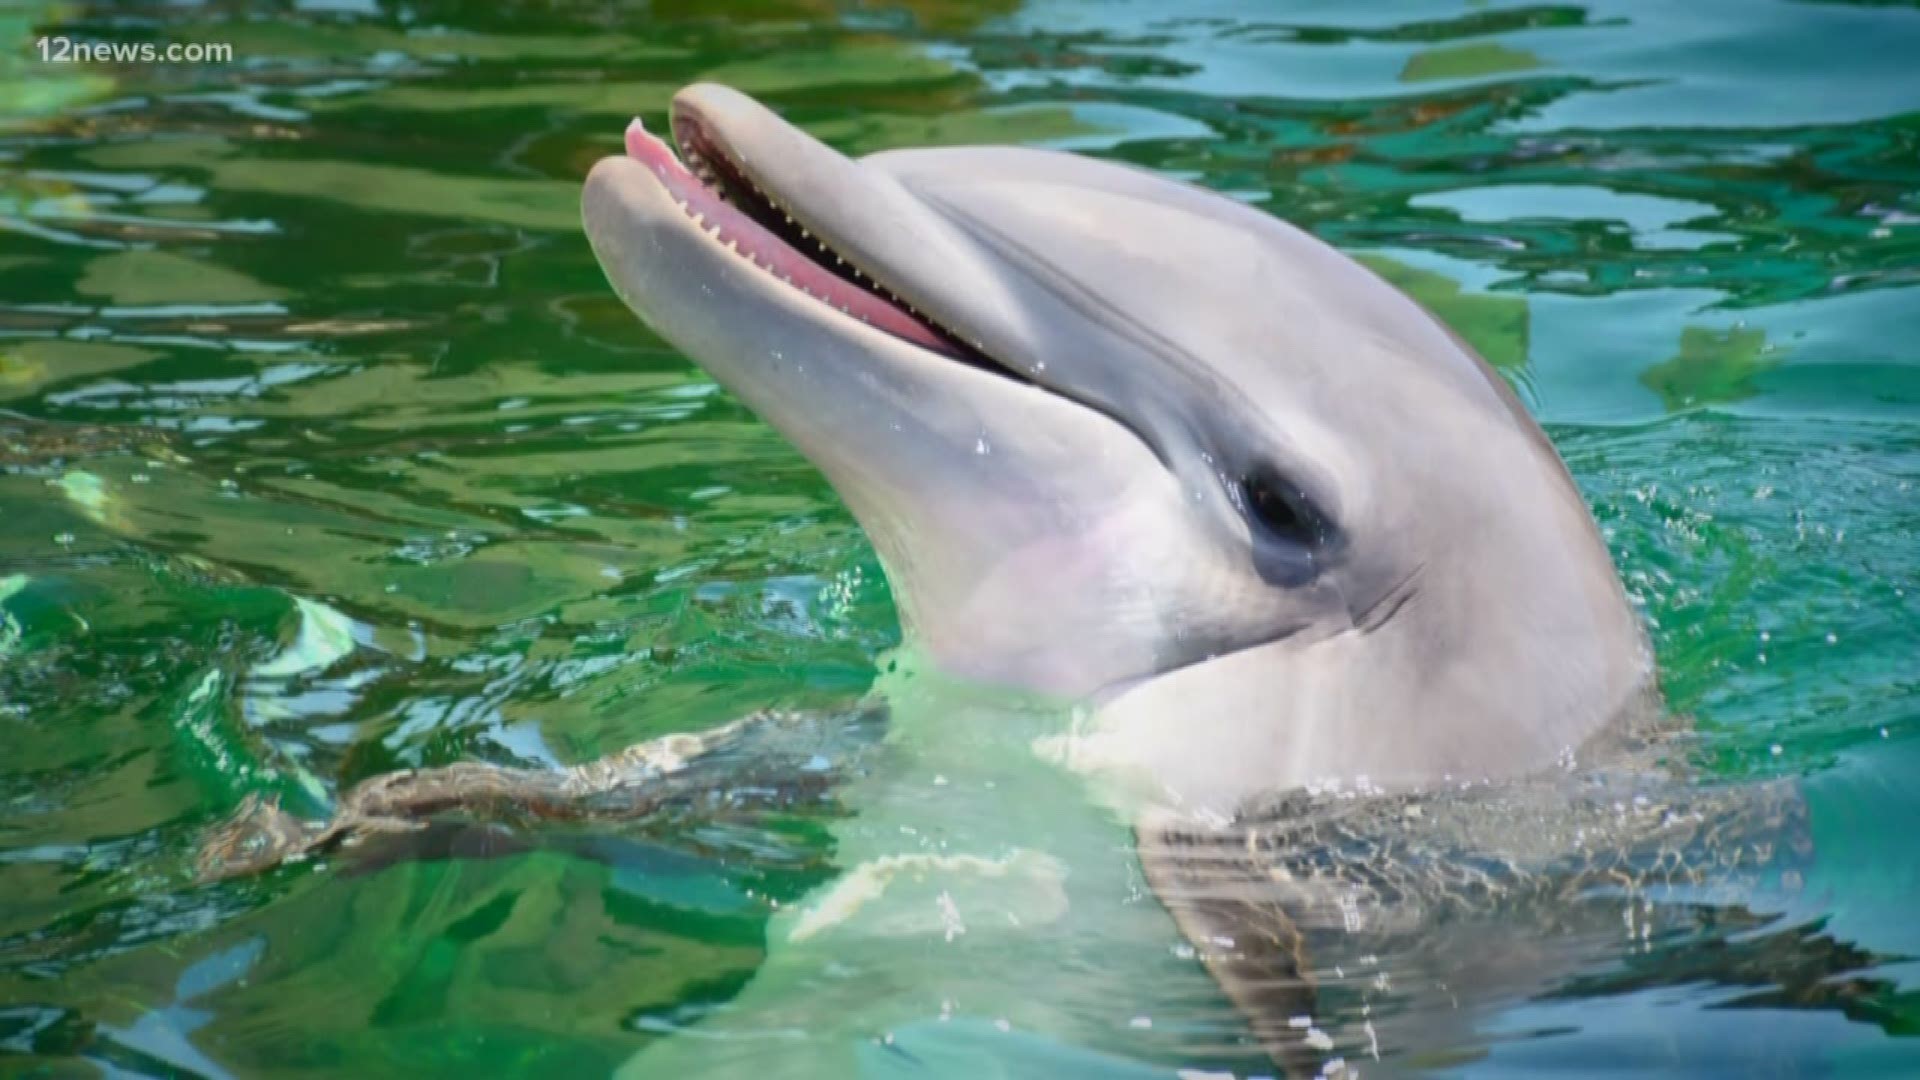 According to a release from the company, the 10-year-old female bottlenose dolphin, named Alia, died early Tuesday morning.